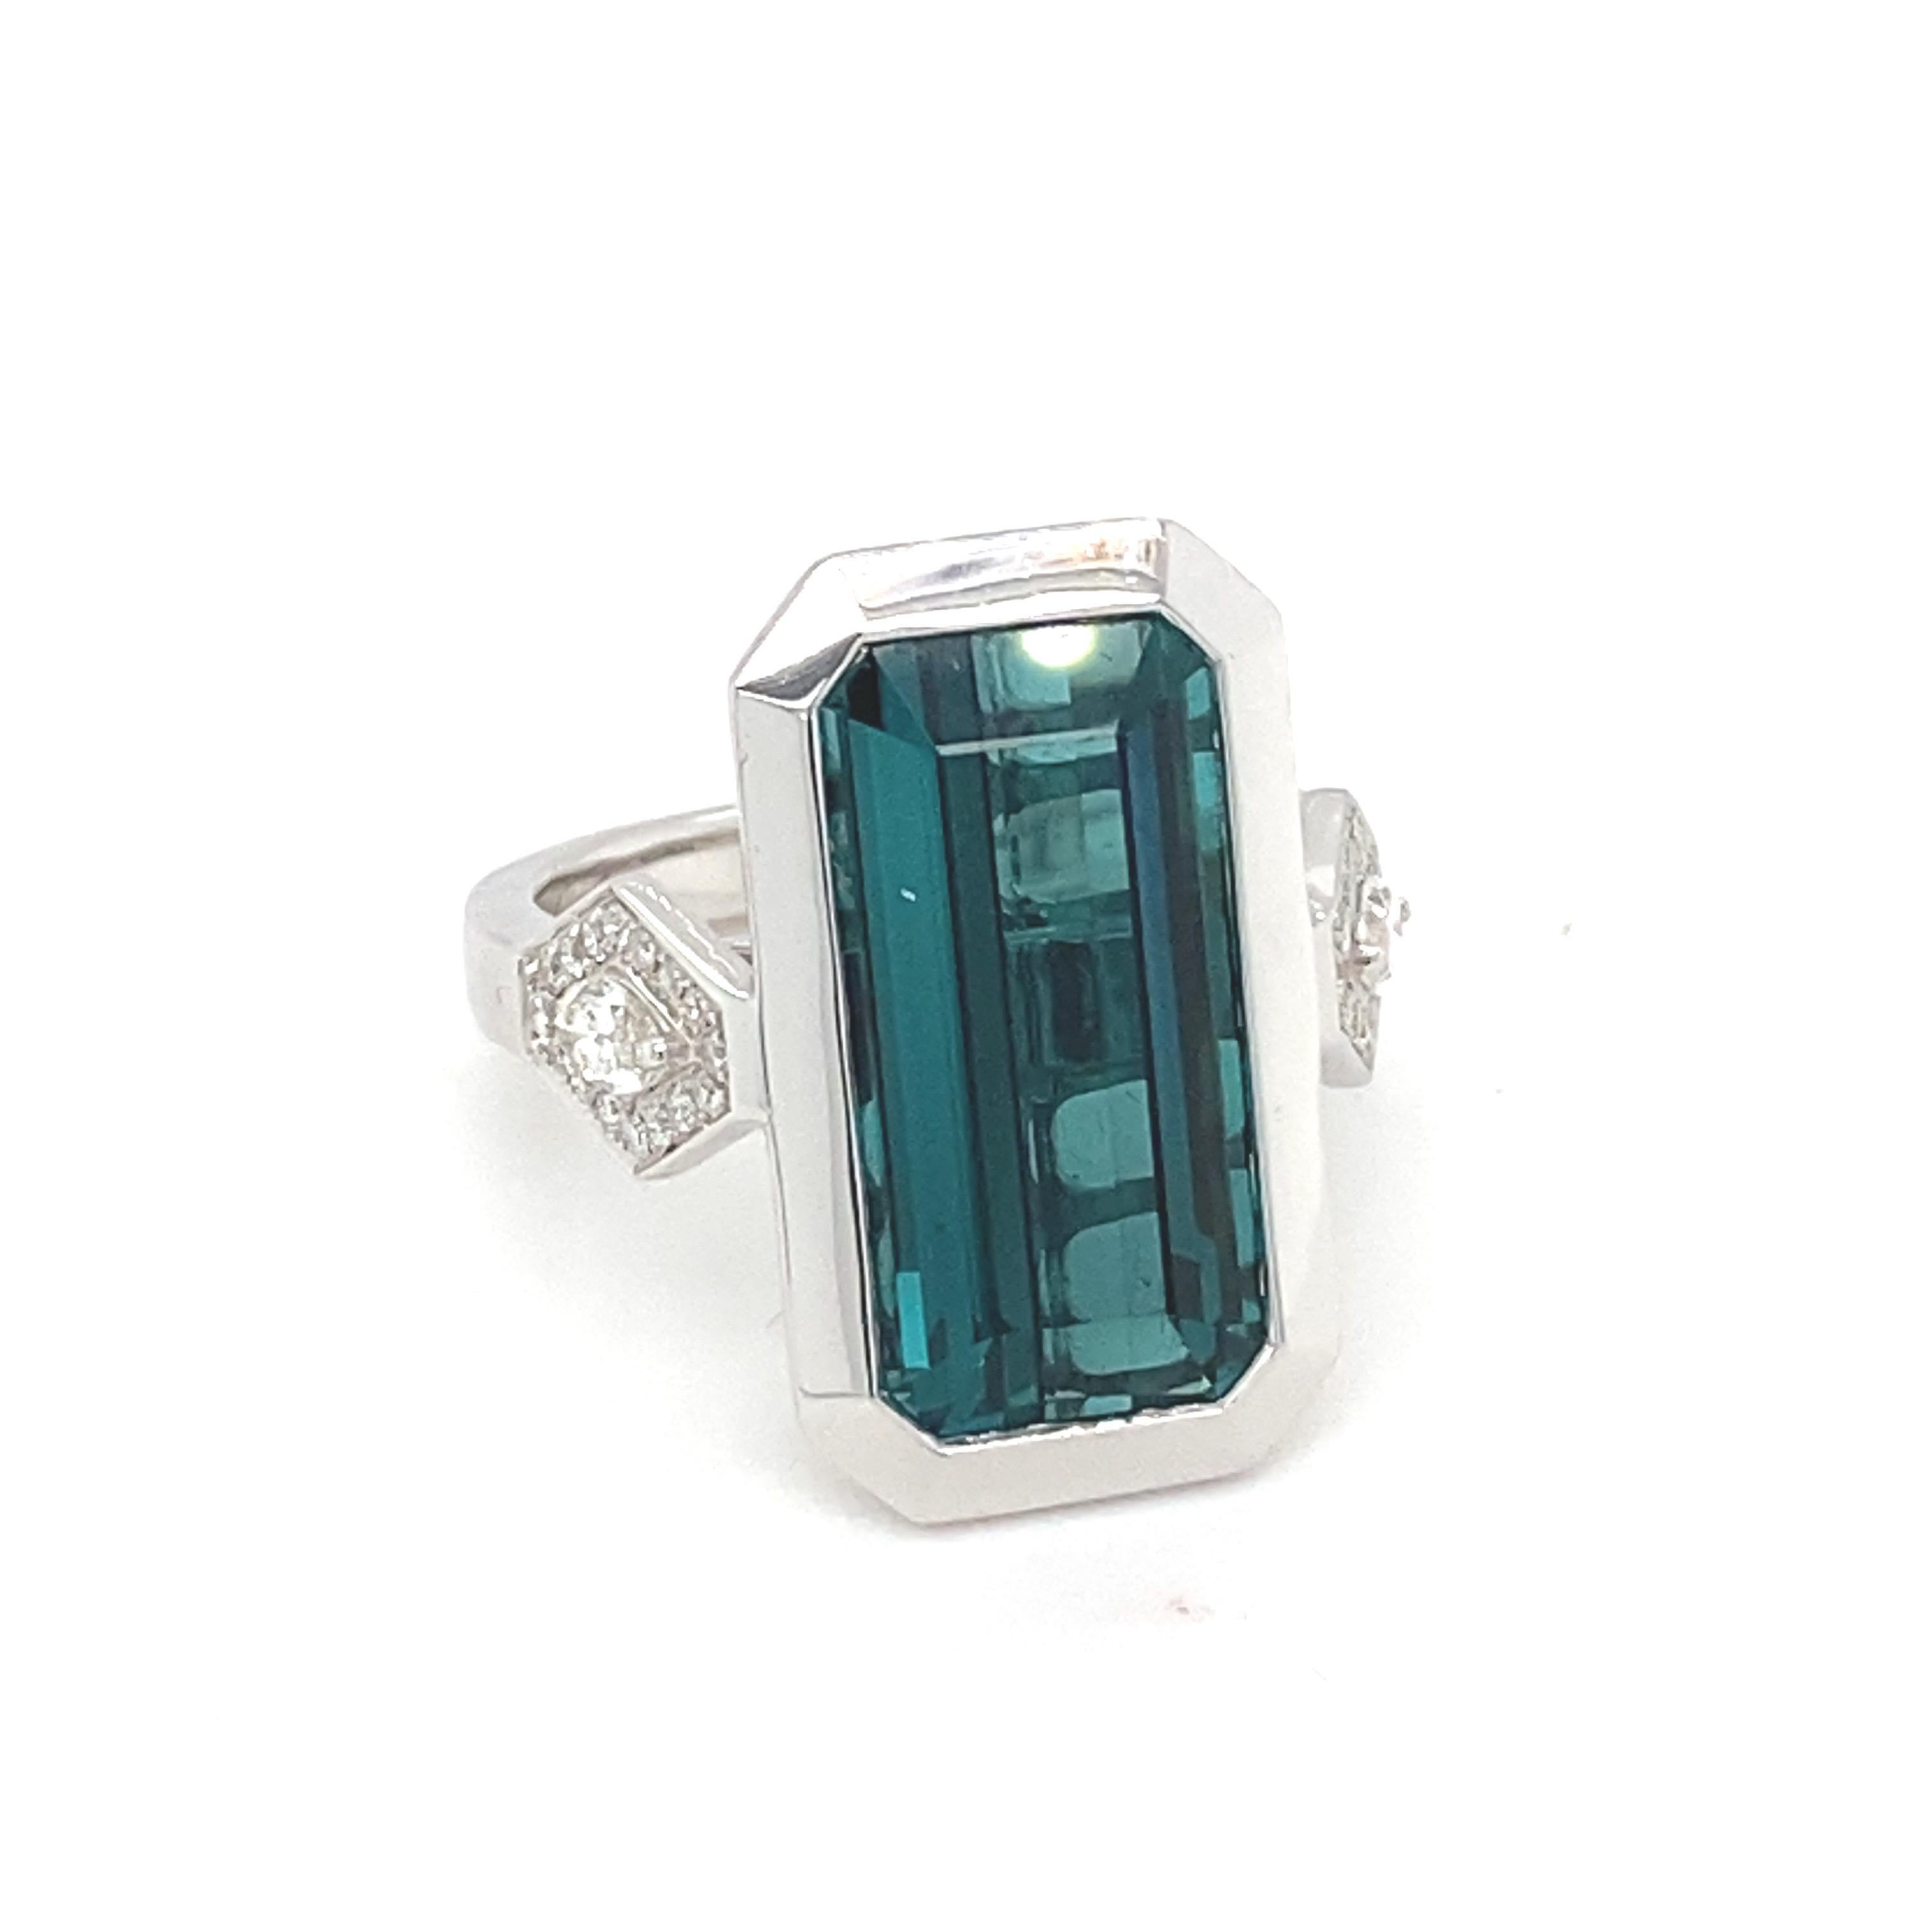 This baguette indicolite tourmaline has bezel setting in white gold. East west has accent diamond. Carefully crafted with skilled artisan this ring design marries elegance and modernity.
Indicolite Tourmaline: 8.28 carat
Diamond: 0.41 carat
Gold: